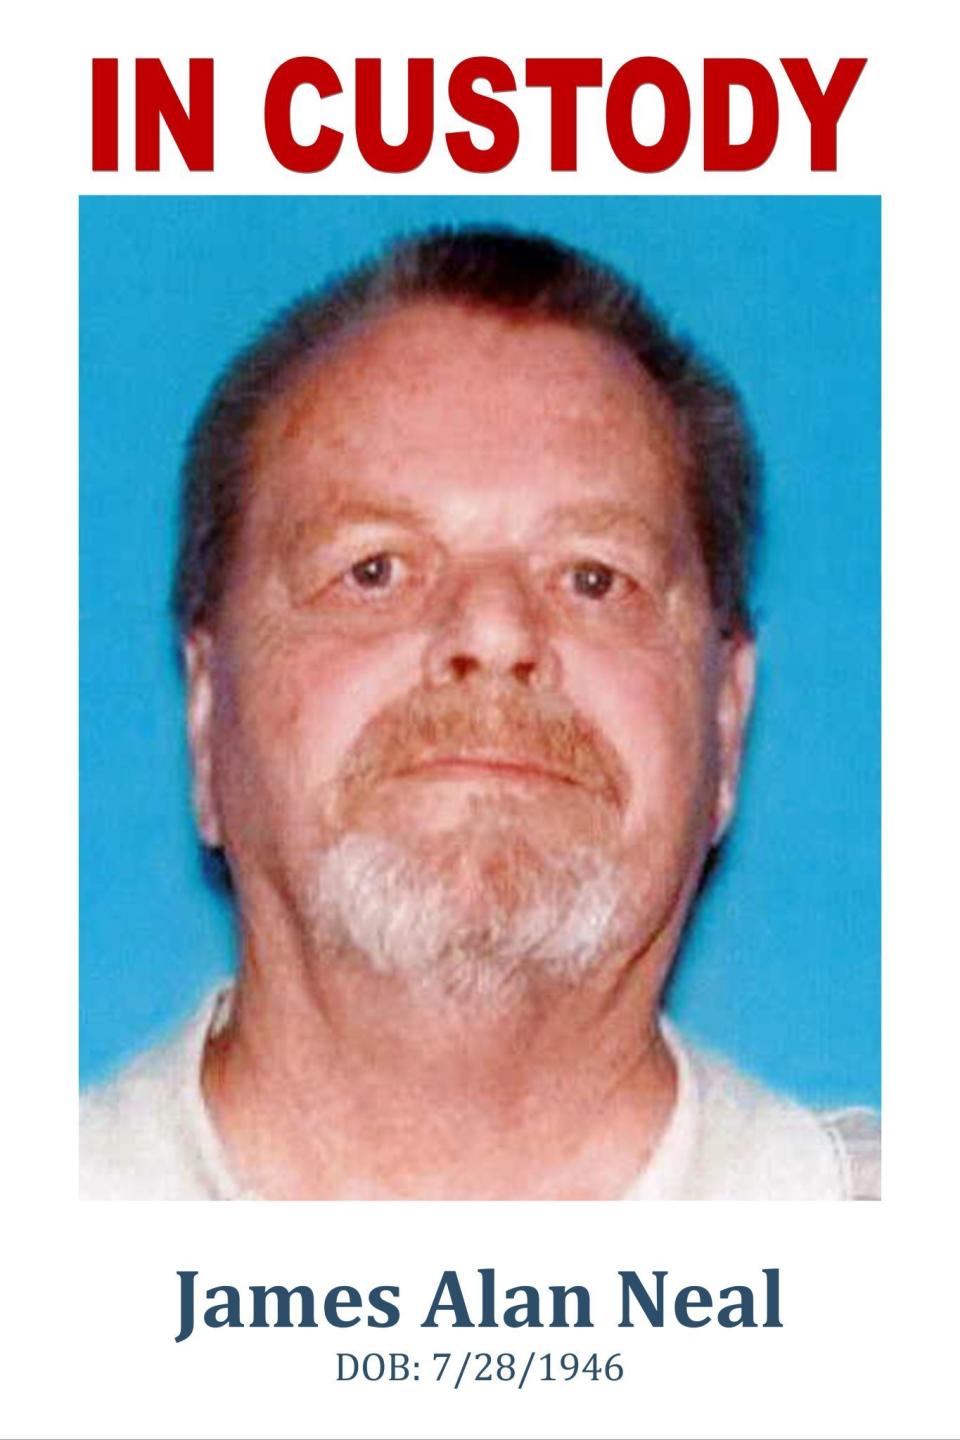 James Alan Neal, 72, has been arrested for the murder of 11-year-old Linda O'Keefe. (Photo: Newport Beach Police)